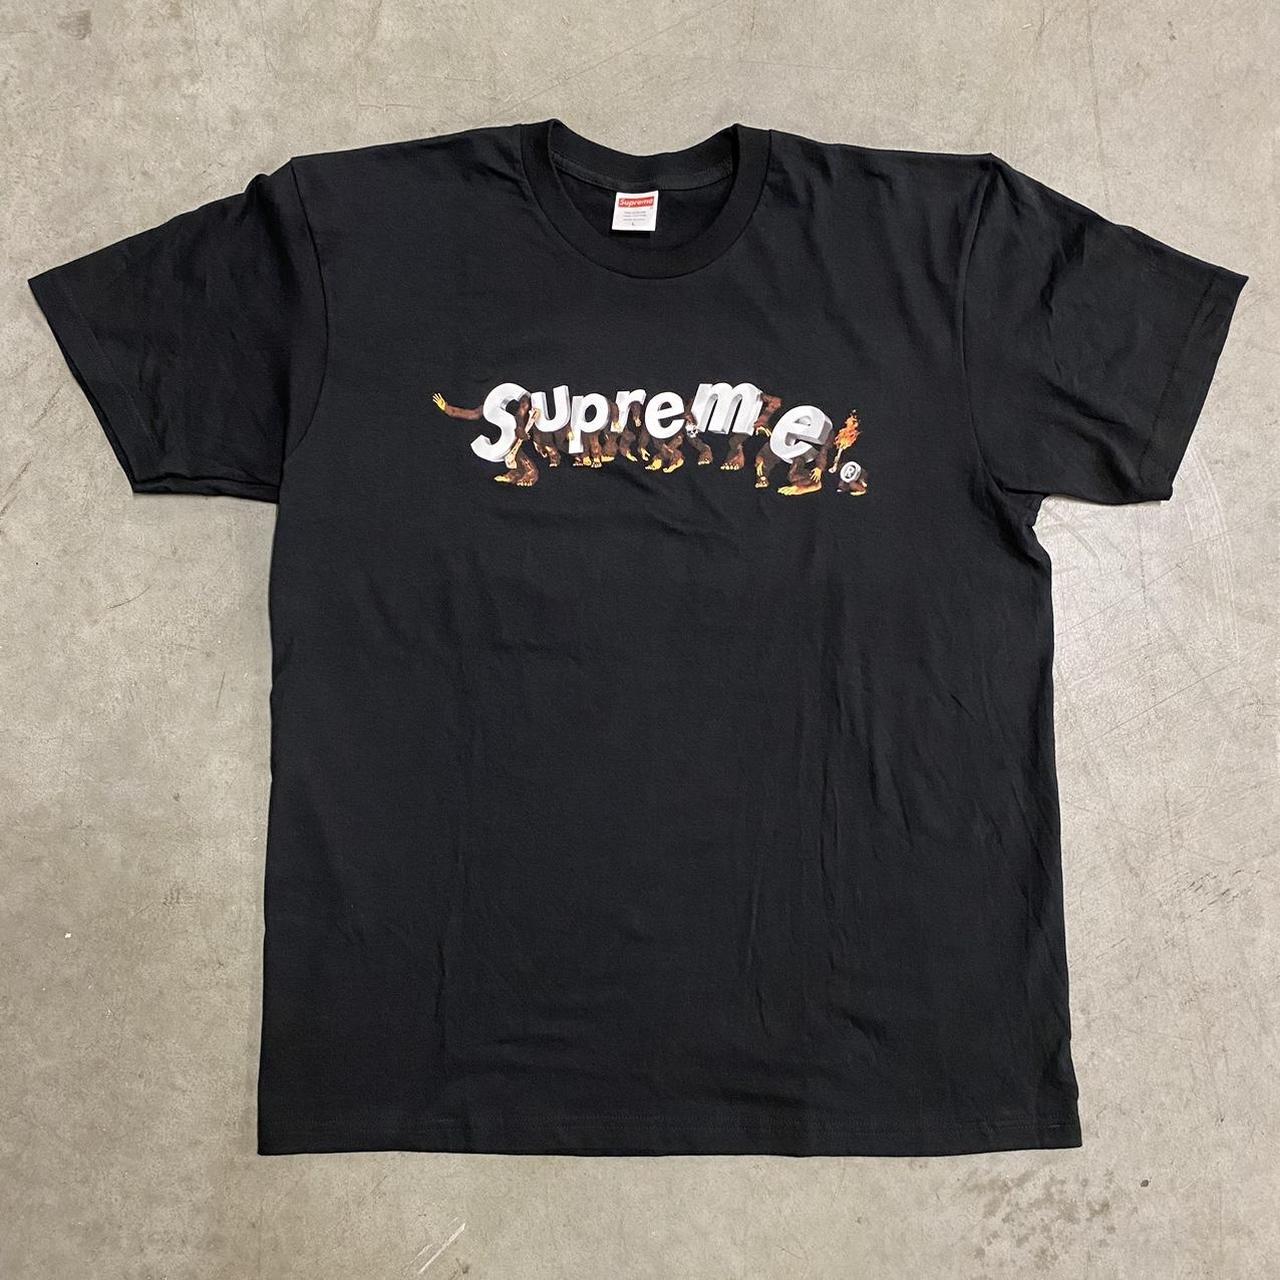 Supreme Apes Graphic T-shirt Dope printed tee from... - Depop